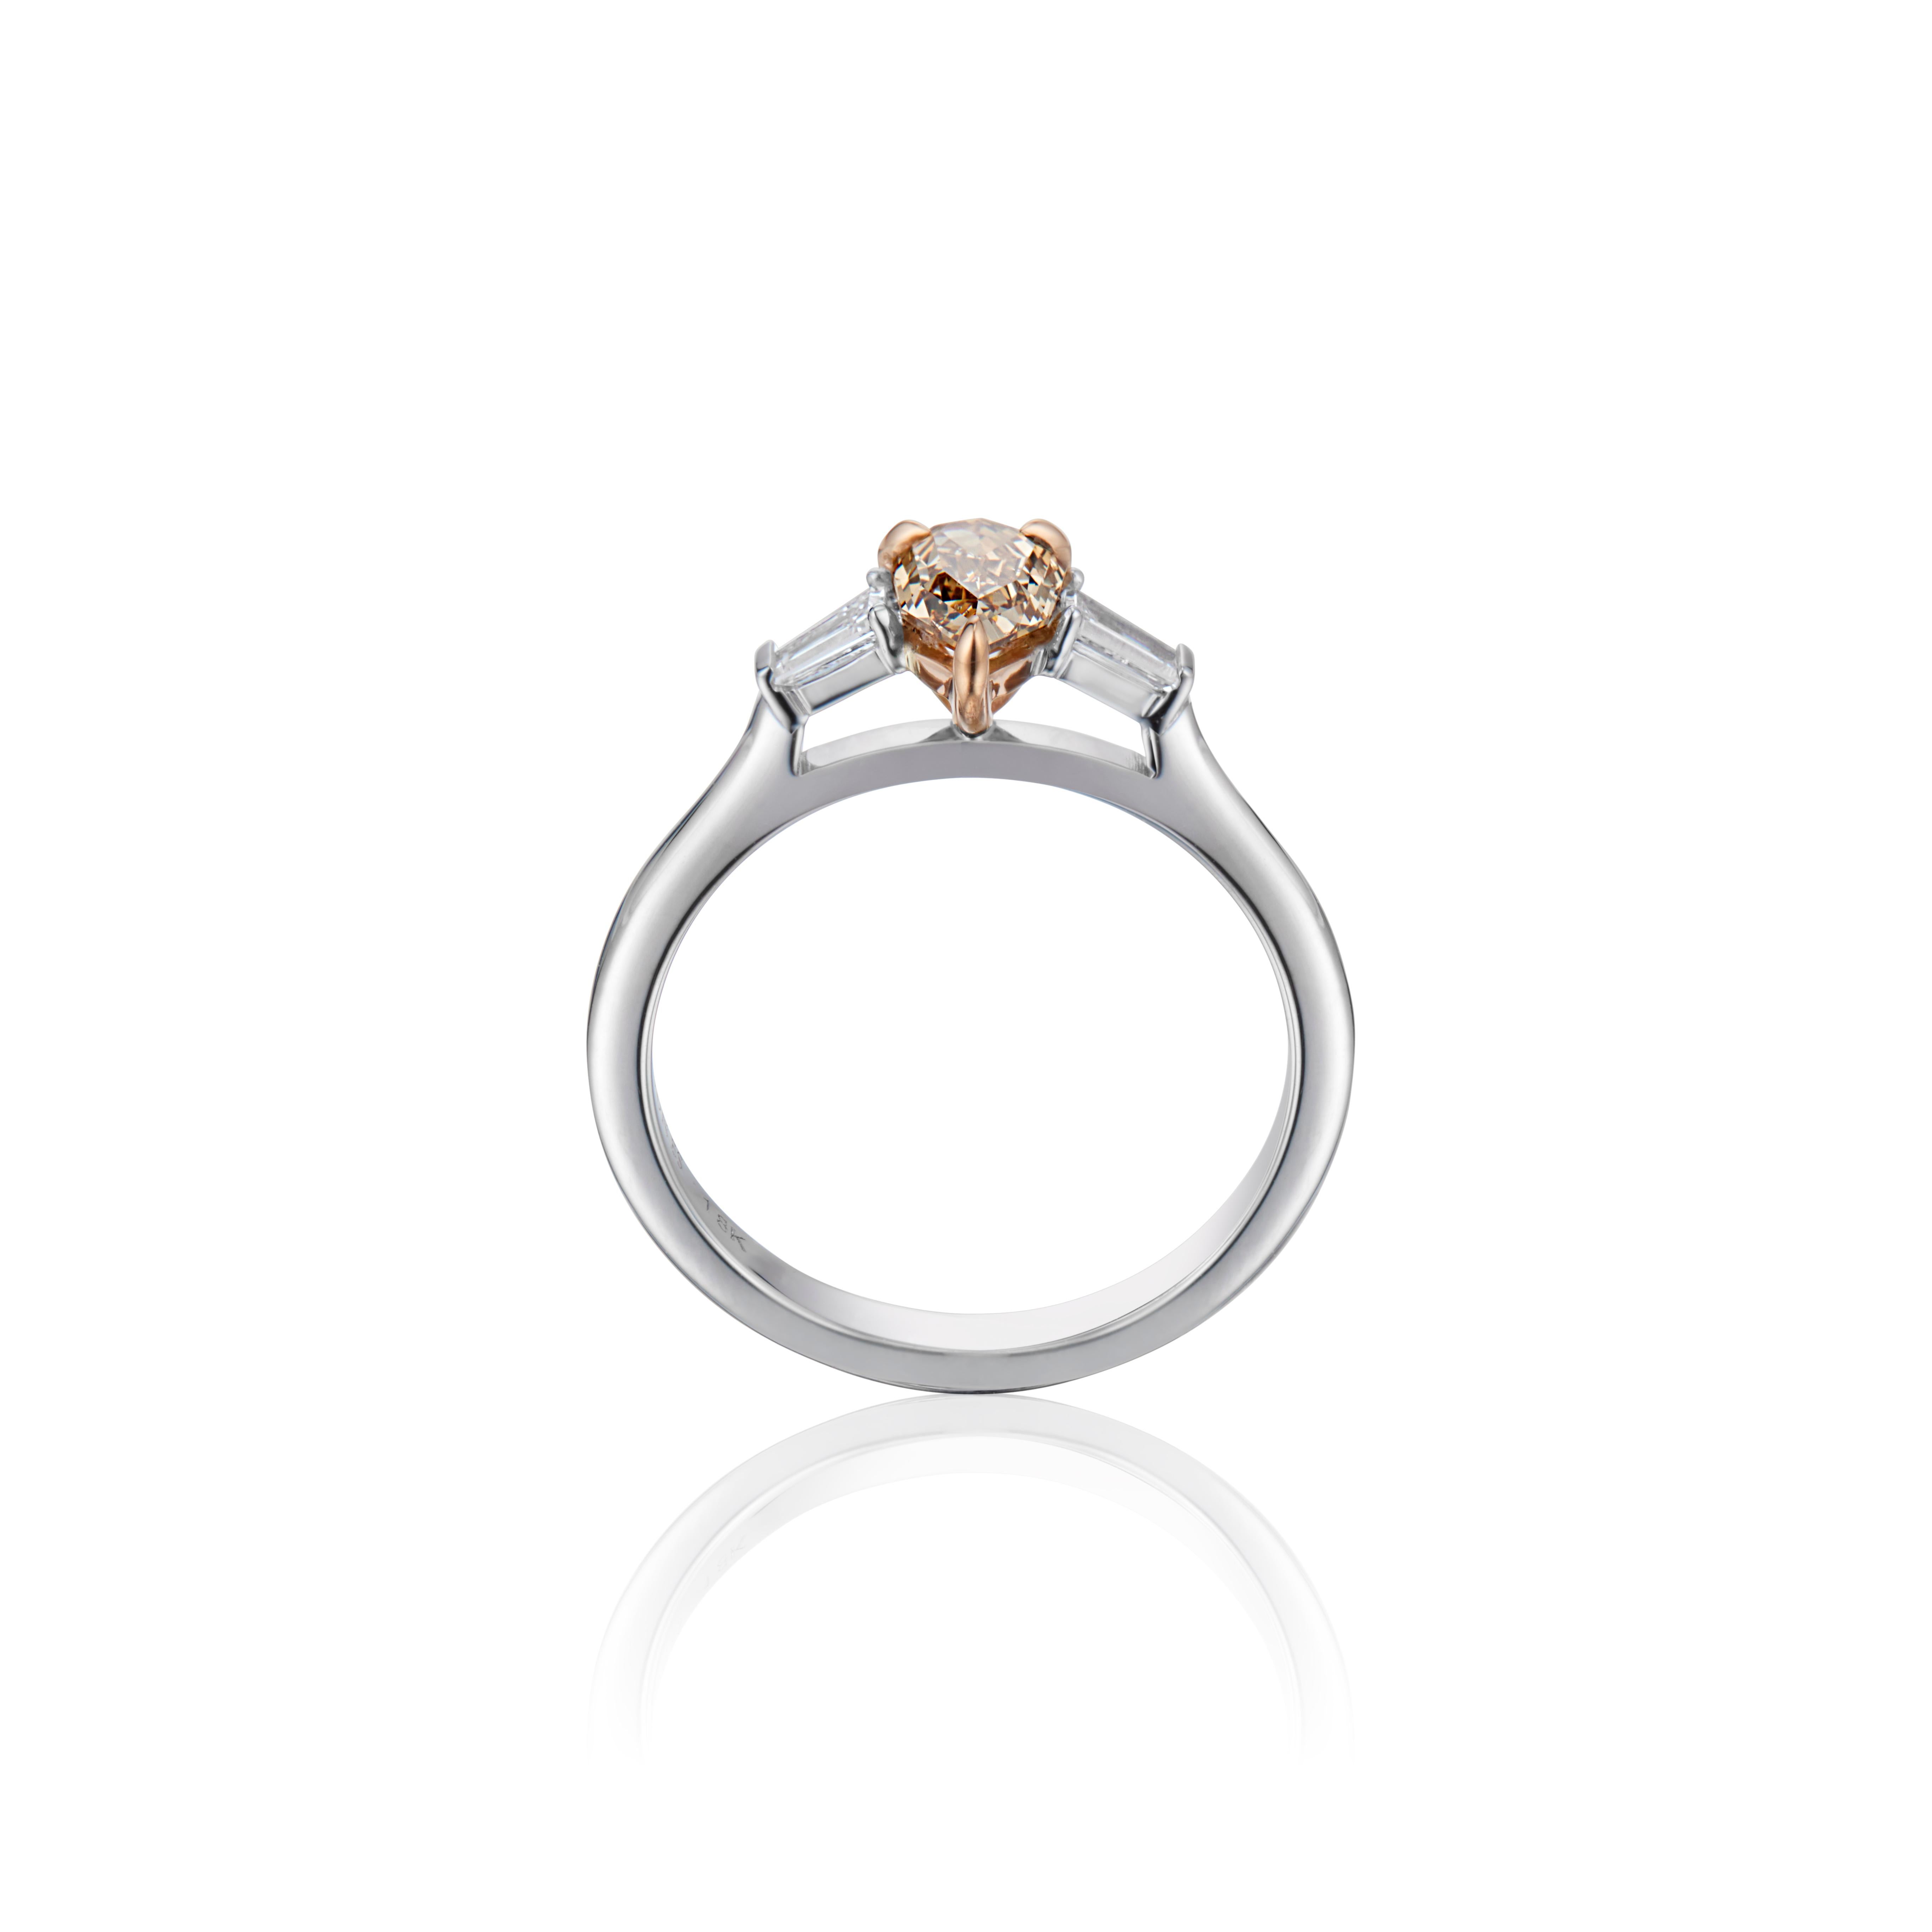 18ct white with rose gold prongs
Approx 3.5gms 18ct Gold
Step Cut Pear-Shape 0.51ct VS Champagne Diamond
2 x Tapered Baguette Diamonds F-VS 0.15ct
Finger Size 